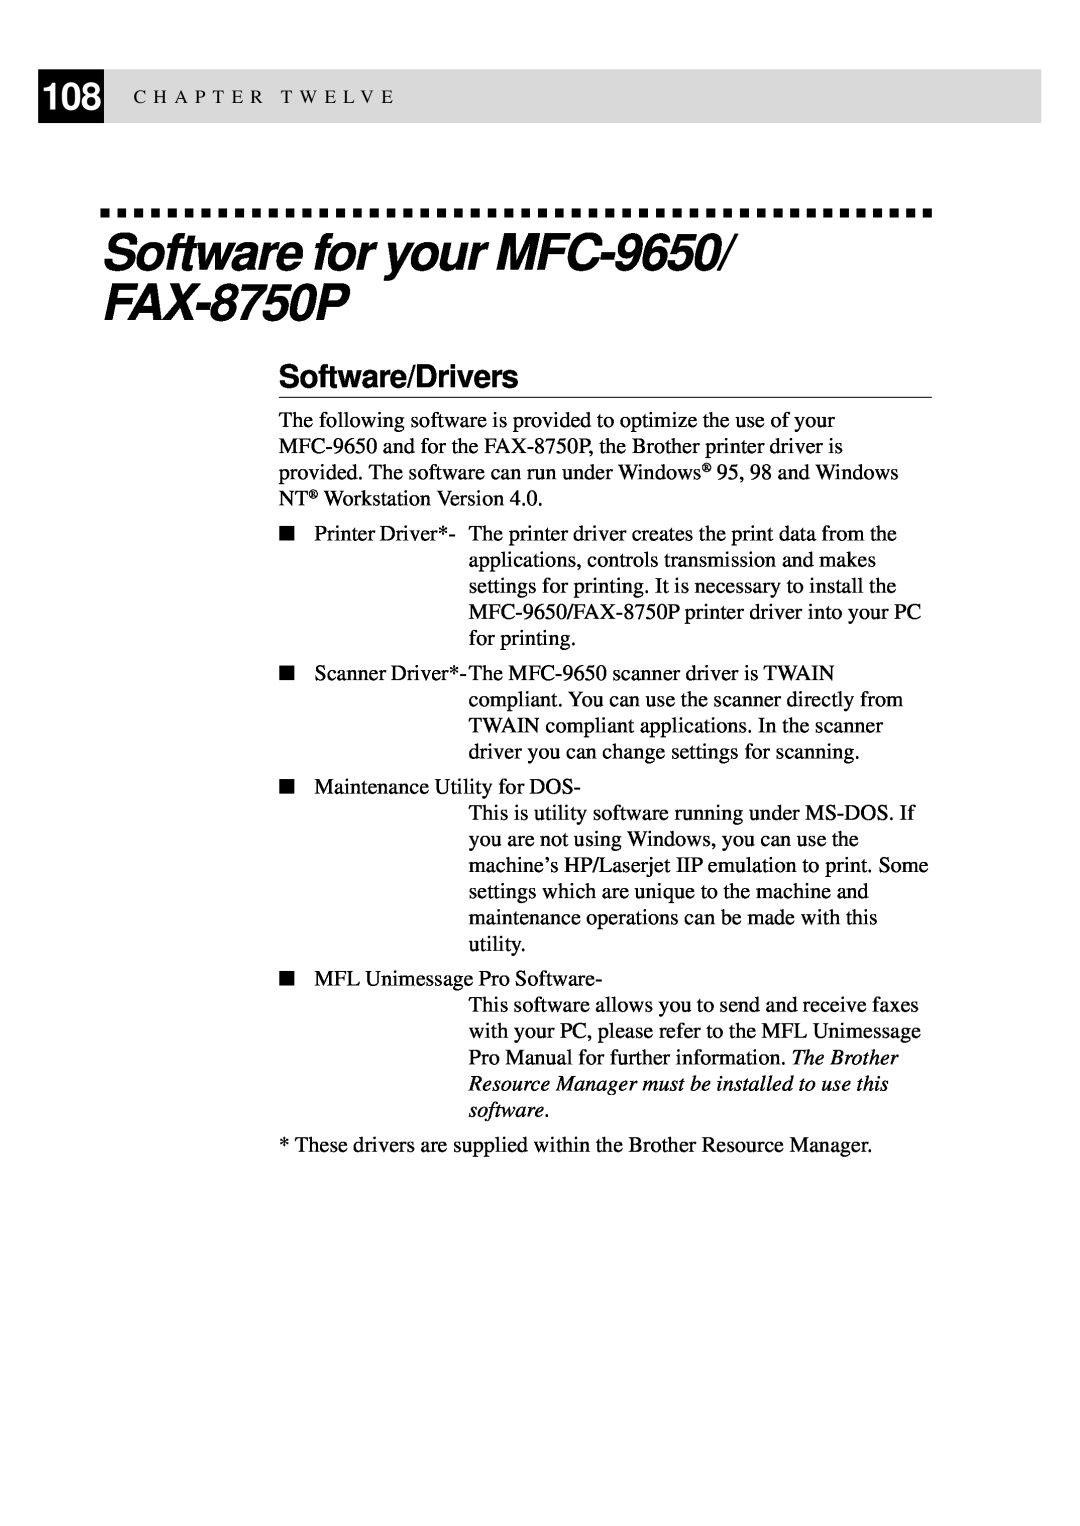 Brother FAX-8350P owner manual Software for your MFC-9650/ FAX-8750P, Software/Drivers 